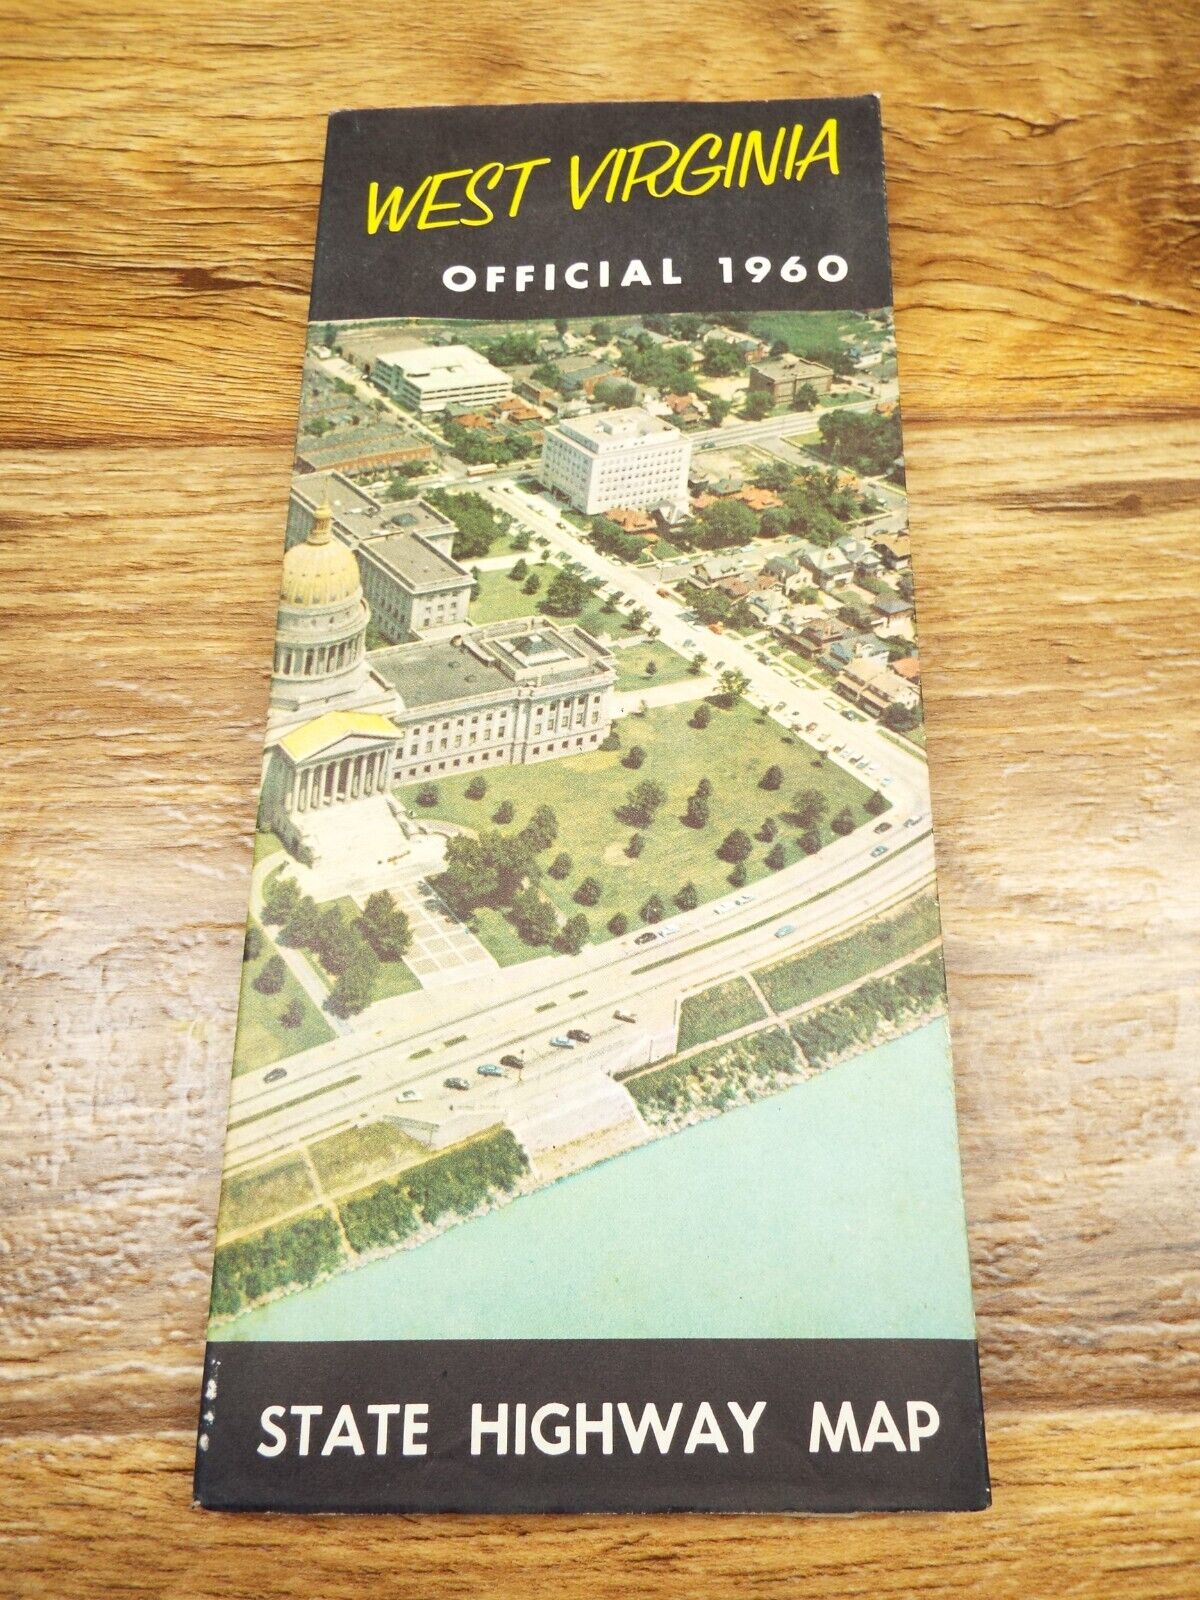 Vintage 1960 West Virginia Official Road Map – State Highway Department